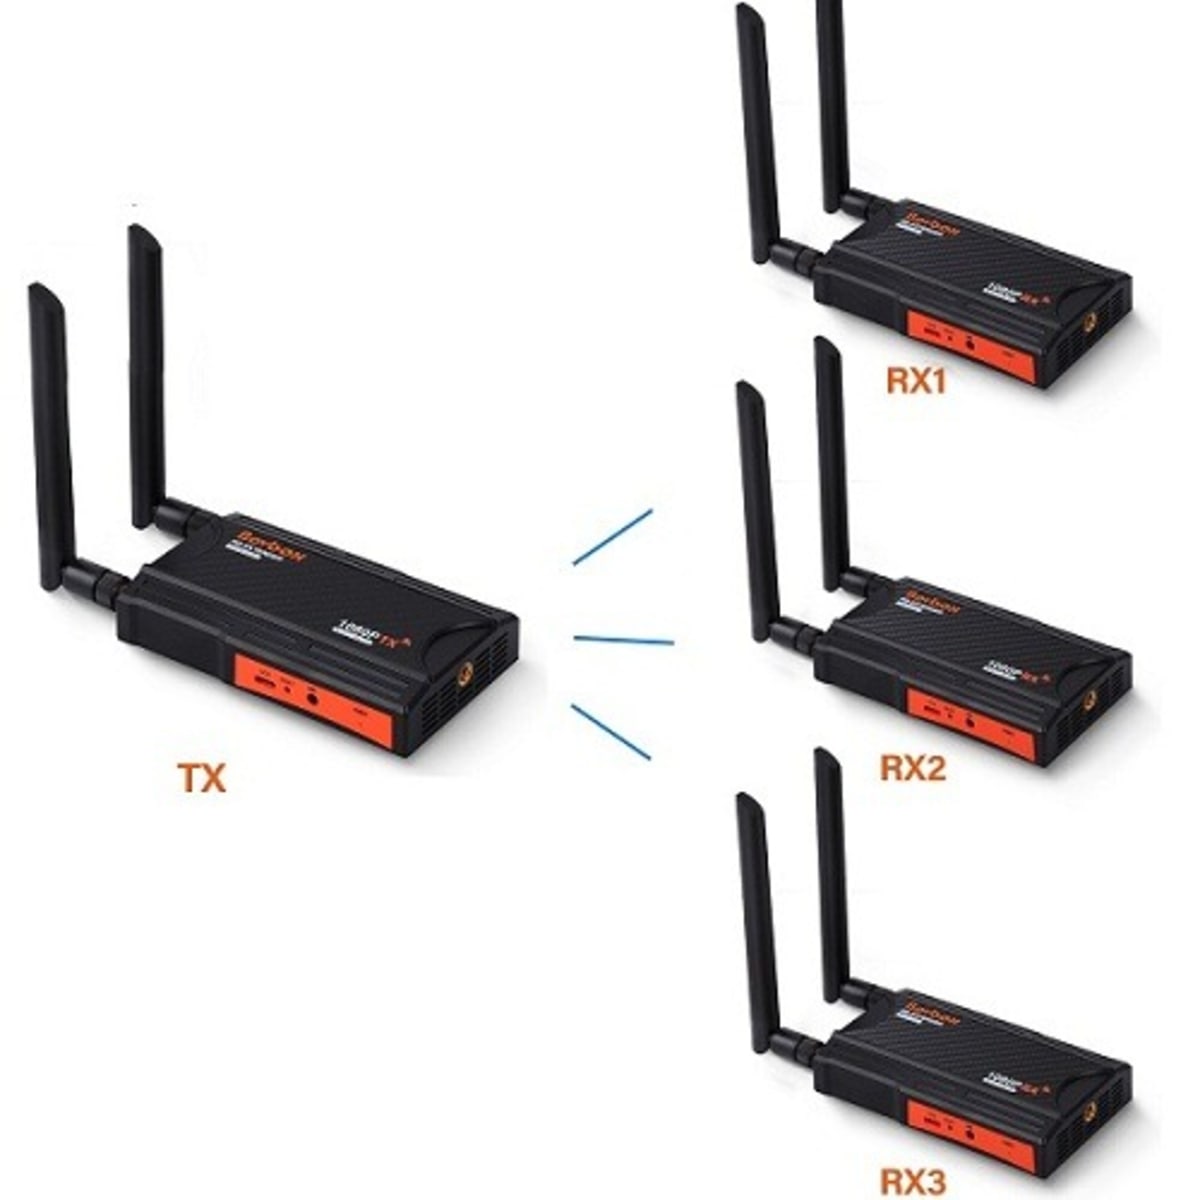 HDMI Wireless Transmitter & Receiver set With Extra Receiver For